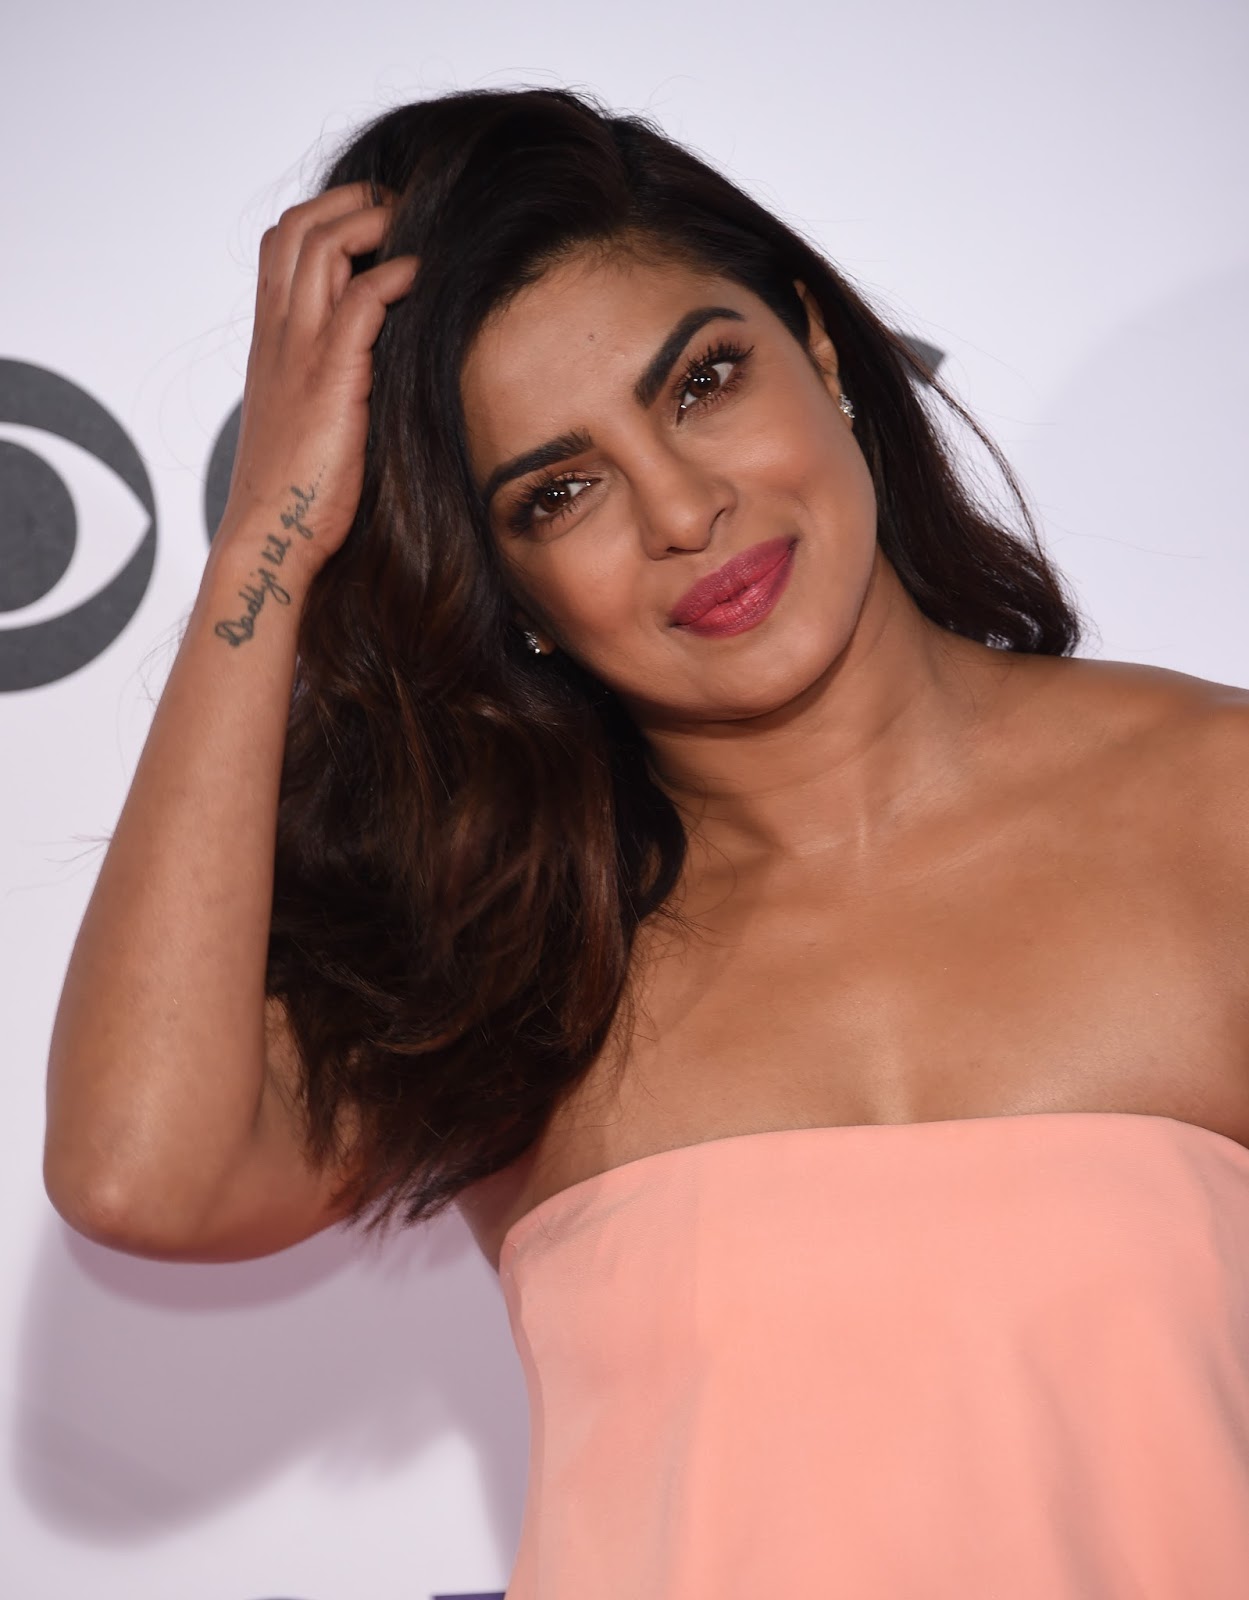 Priyanka Chopra Looks Hot As She Attends The People's Choice Awards 2017 at Microsoft Theater in Los Angeles